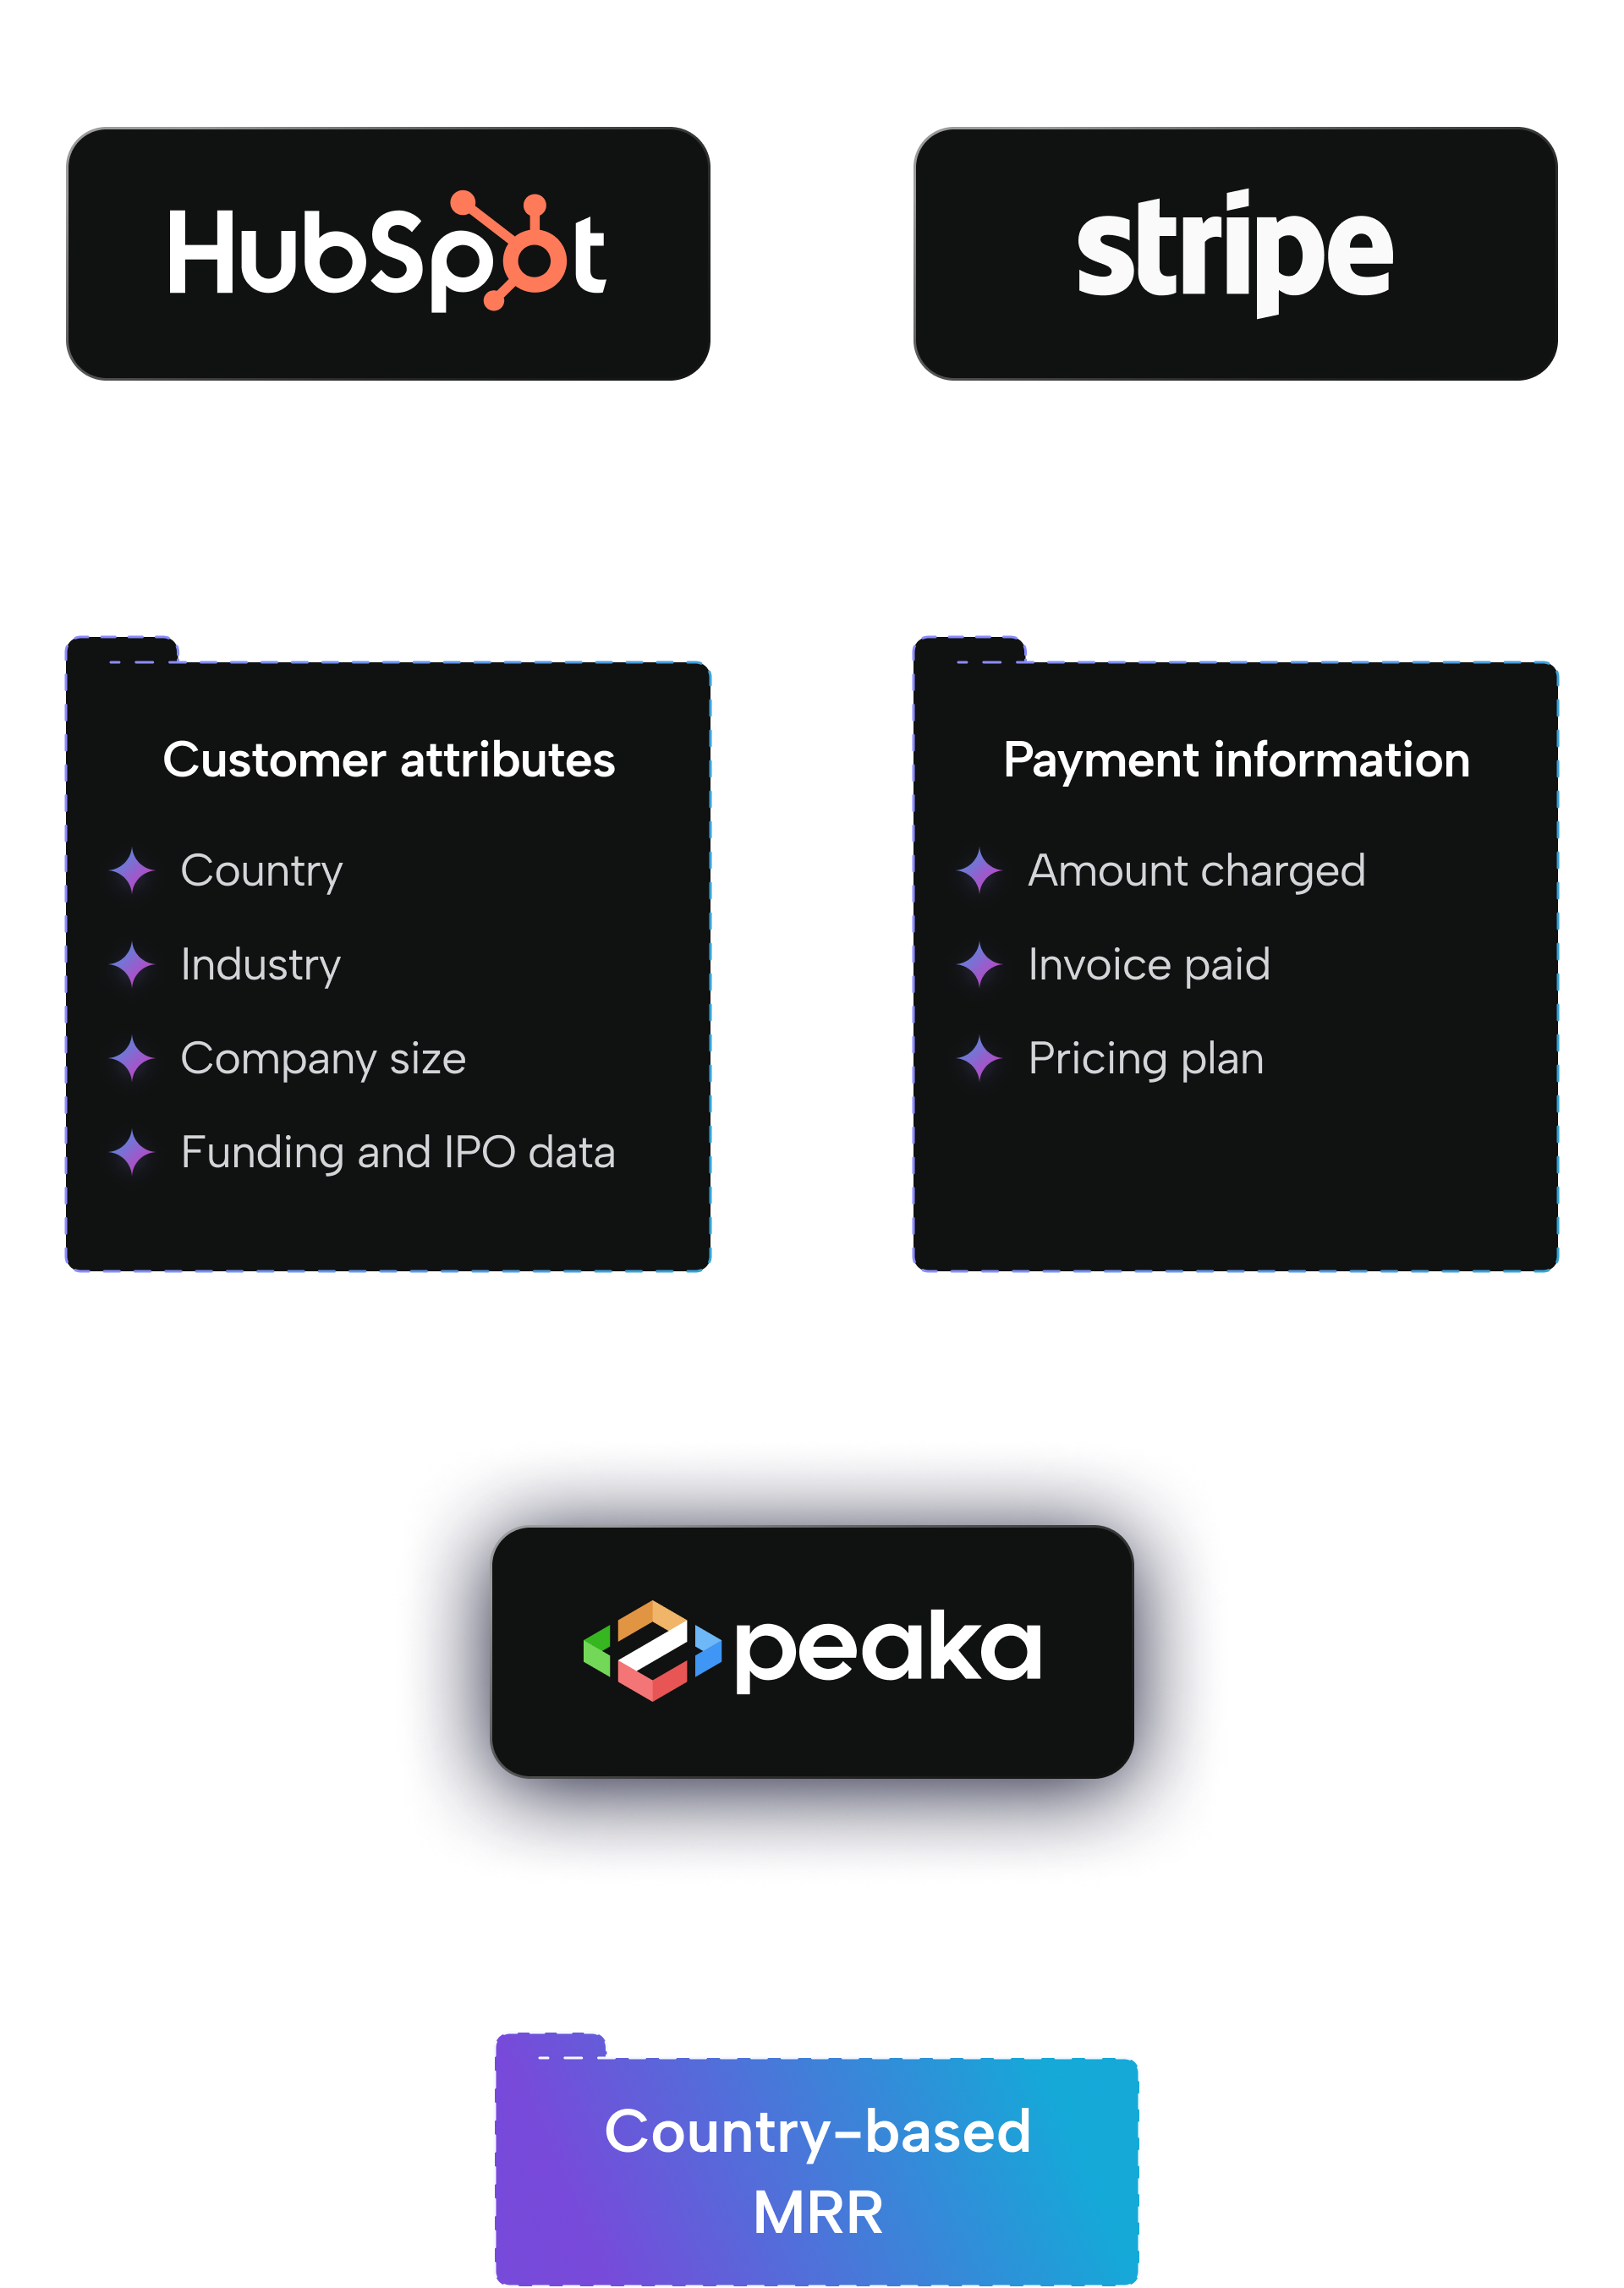 What can you do with Peaka's HubSpot-Stripe connector?